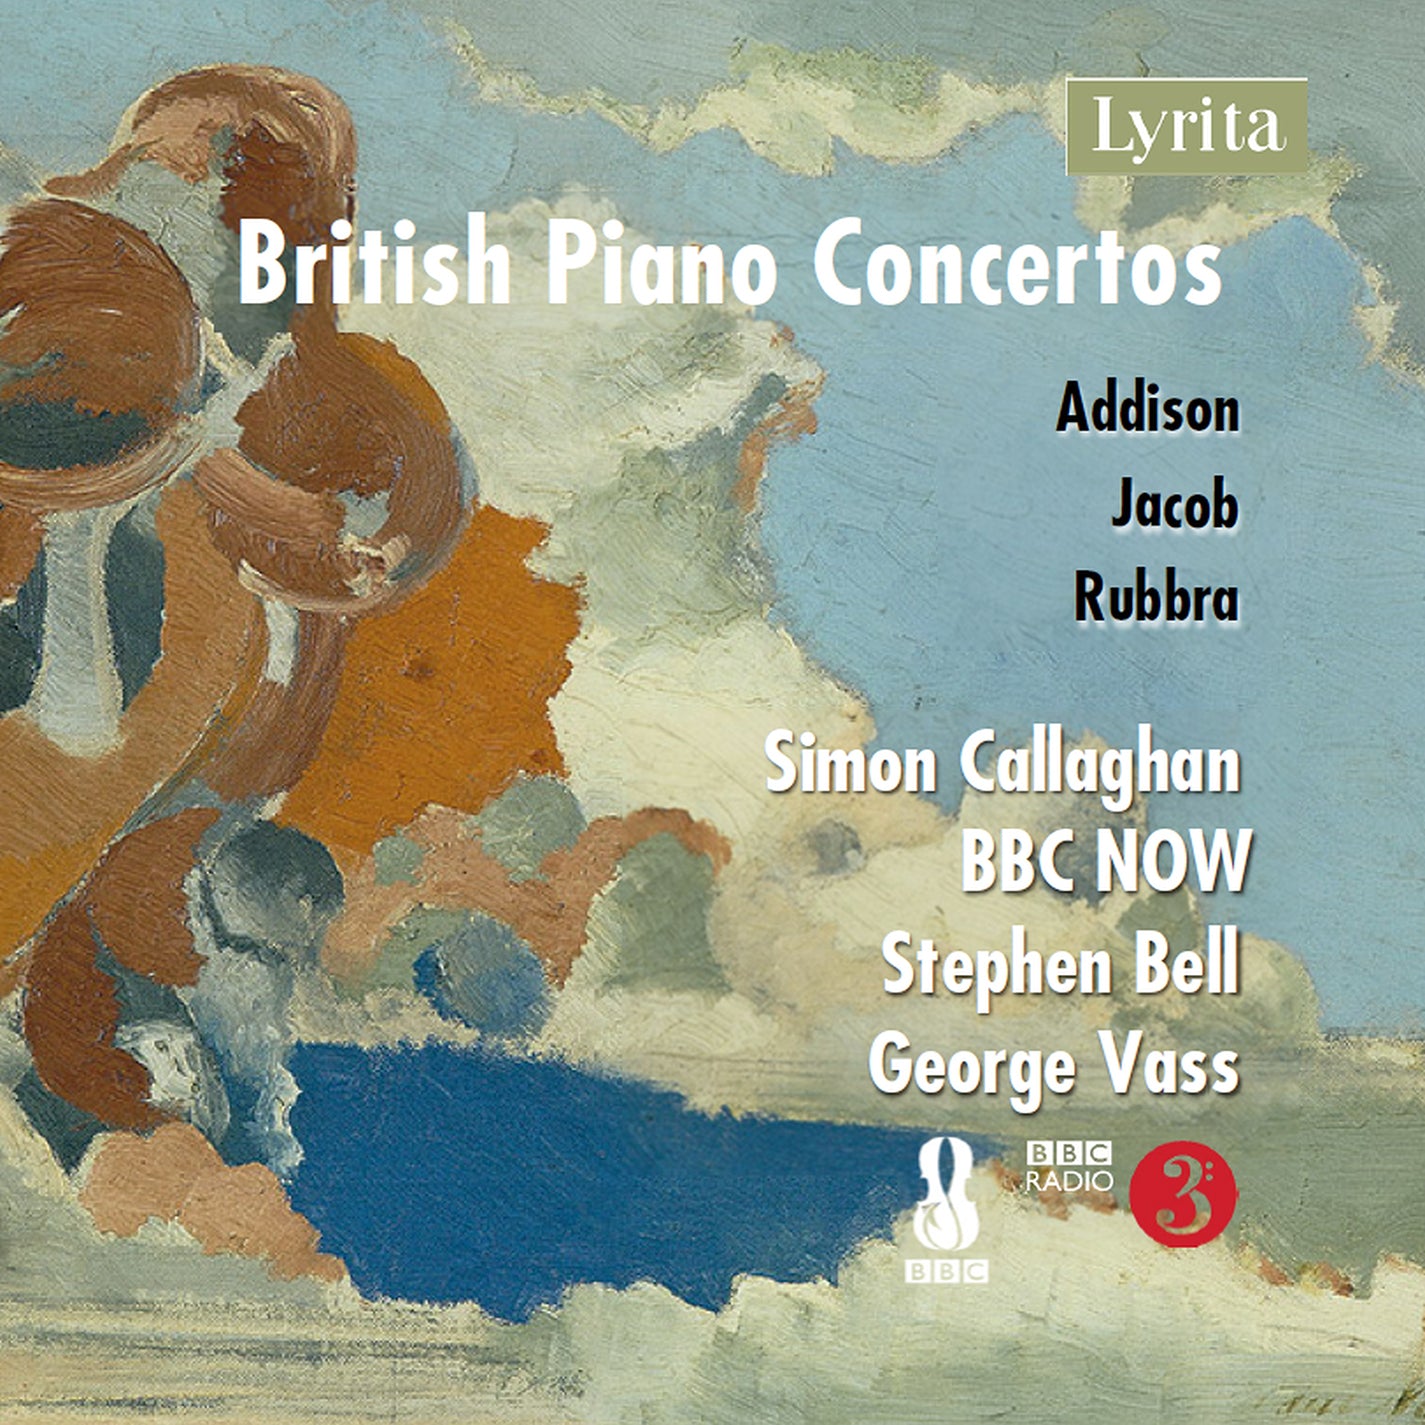 British Piano Concertos, Vol. 2 / Callaghan, Bell, Vass, BBC Music NOW